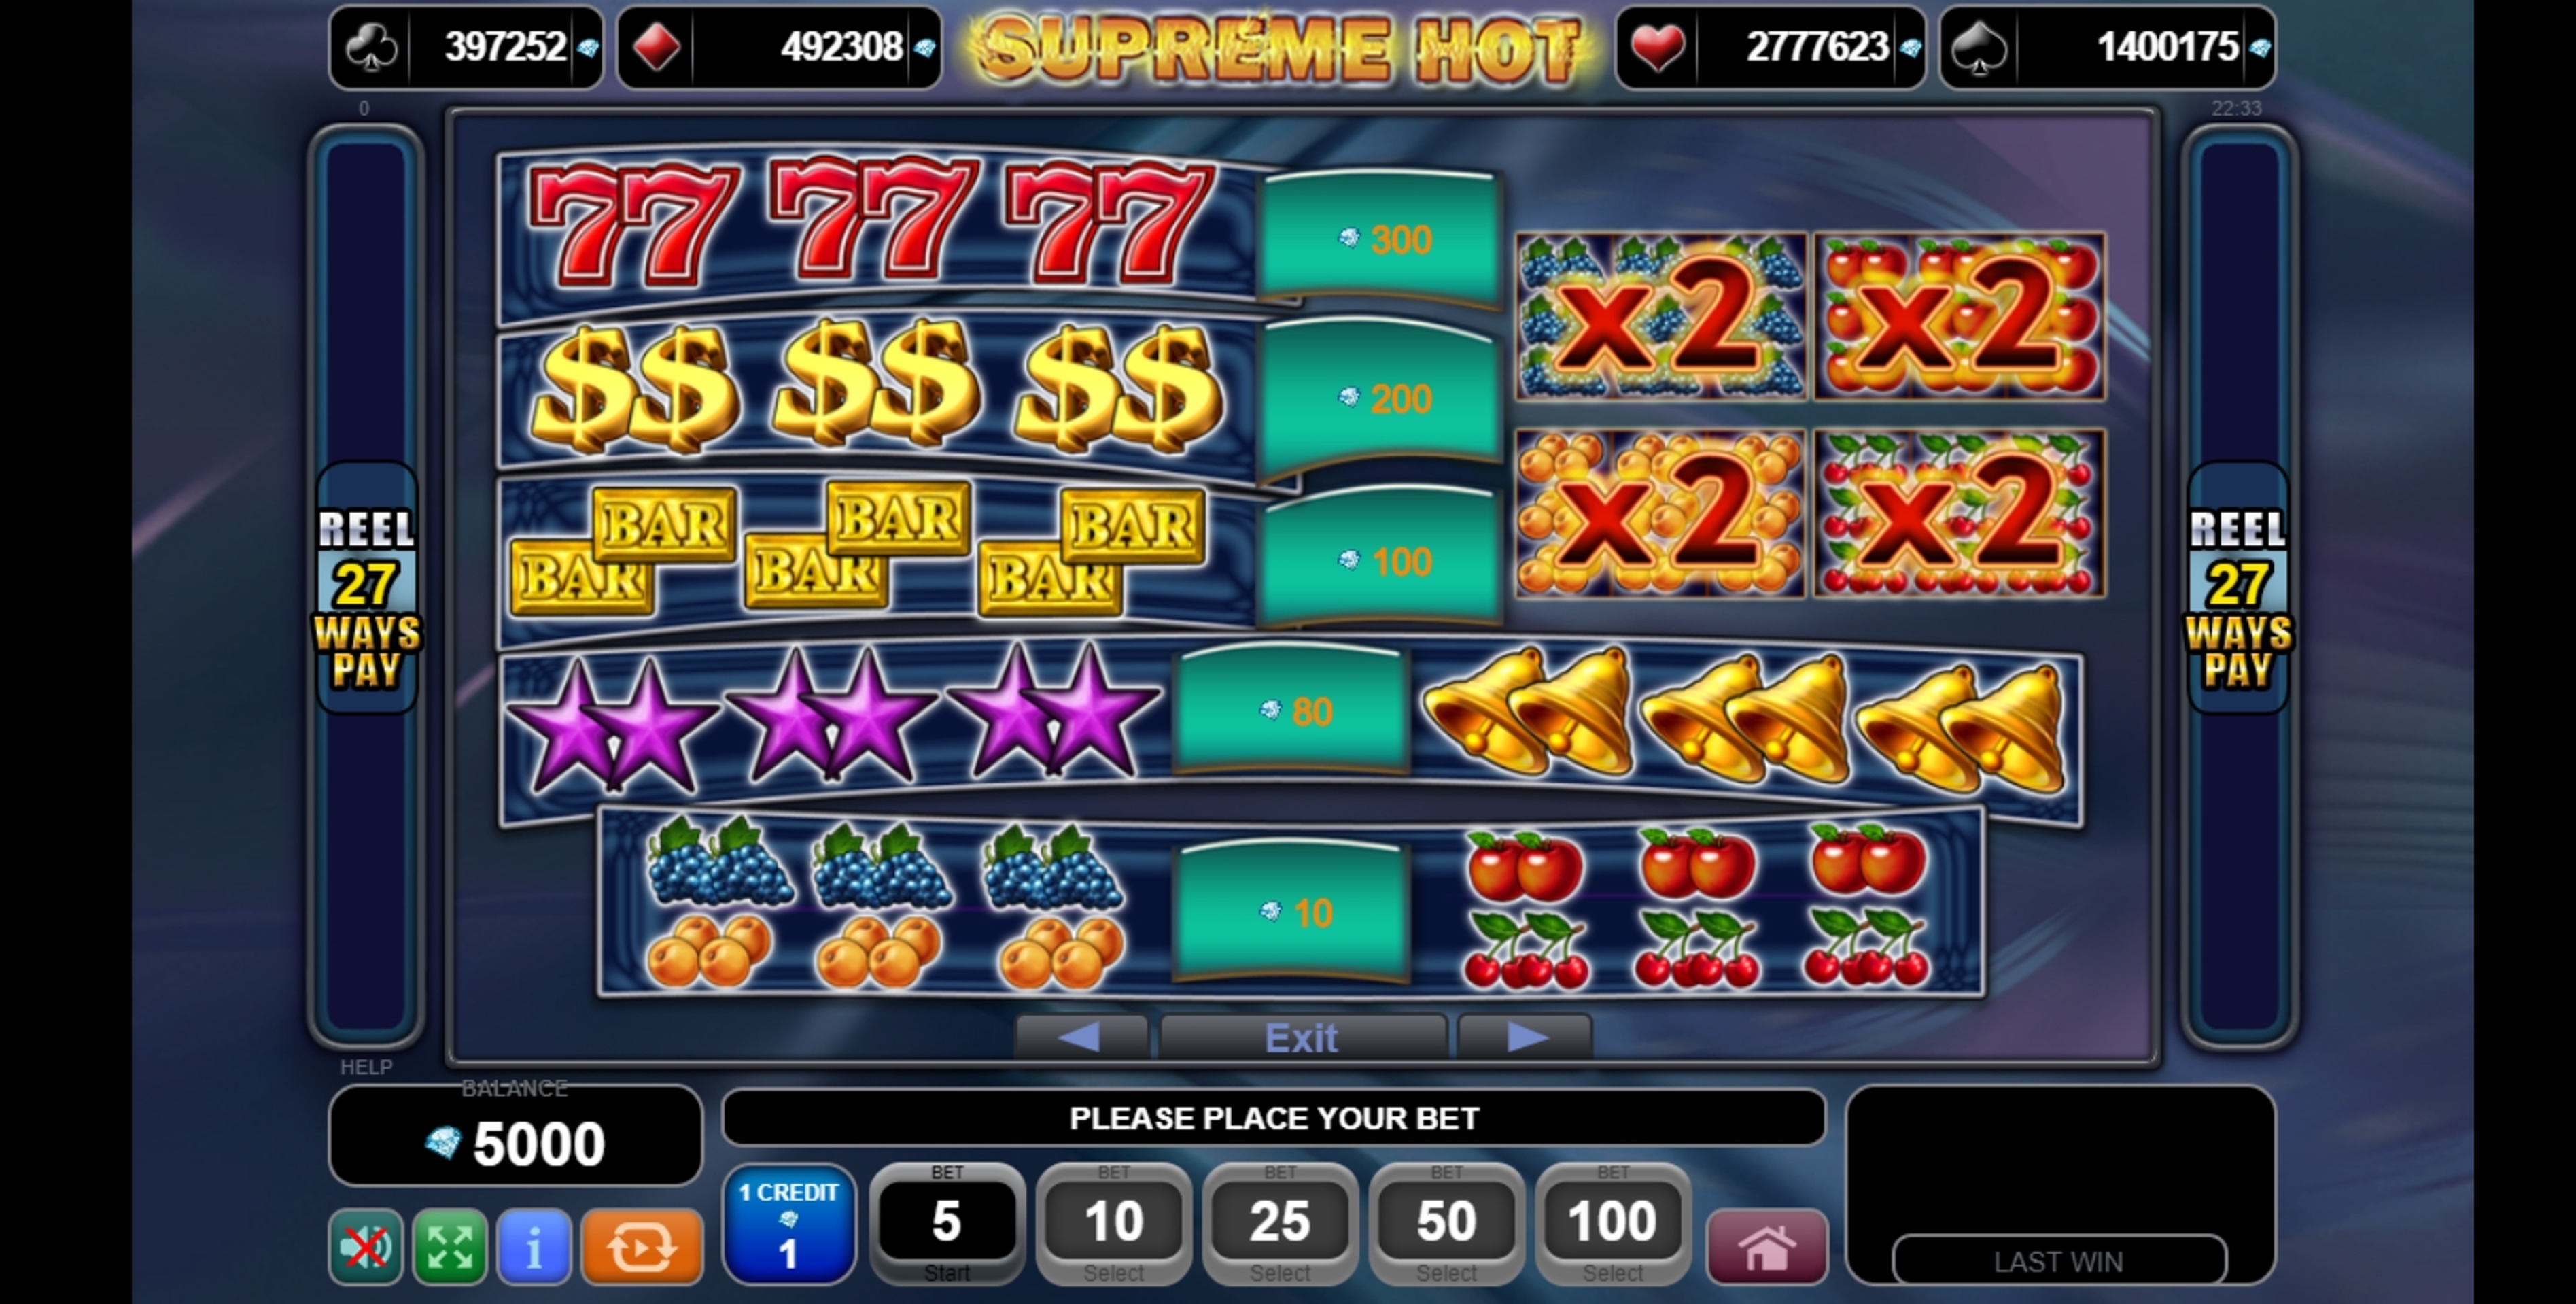 Info of Supreme Hot Slot Game by EGT